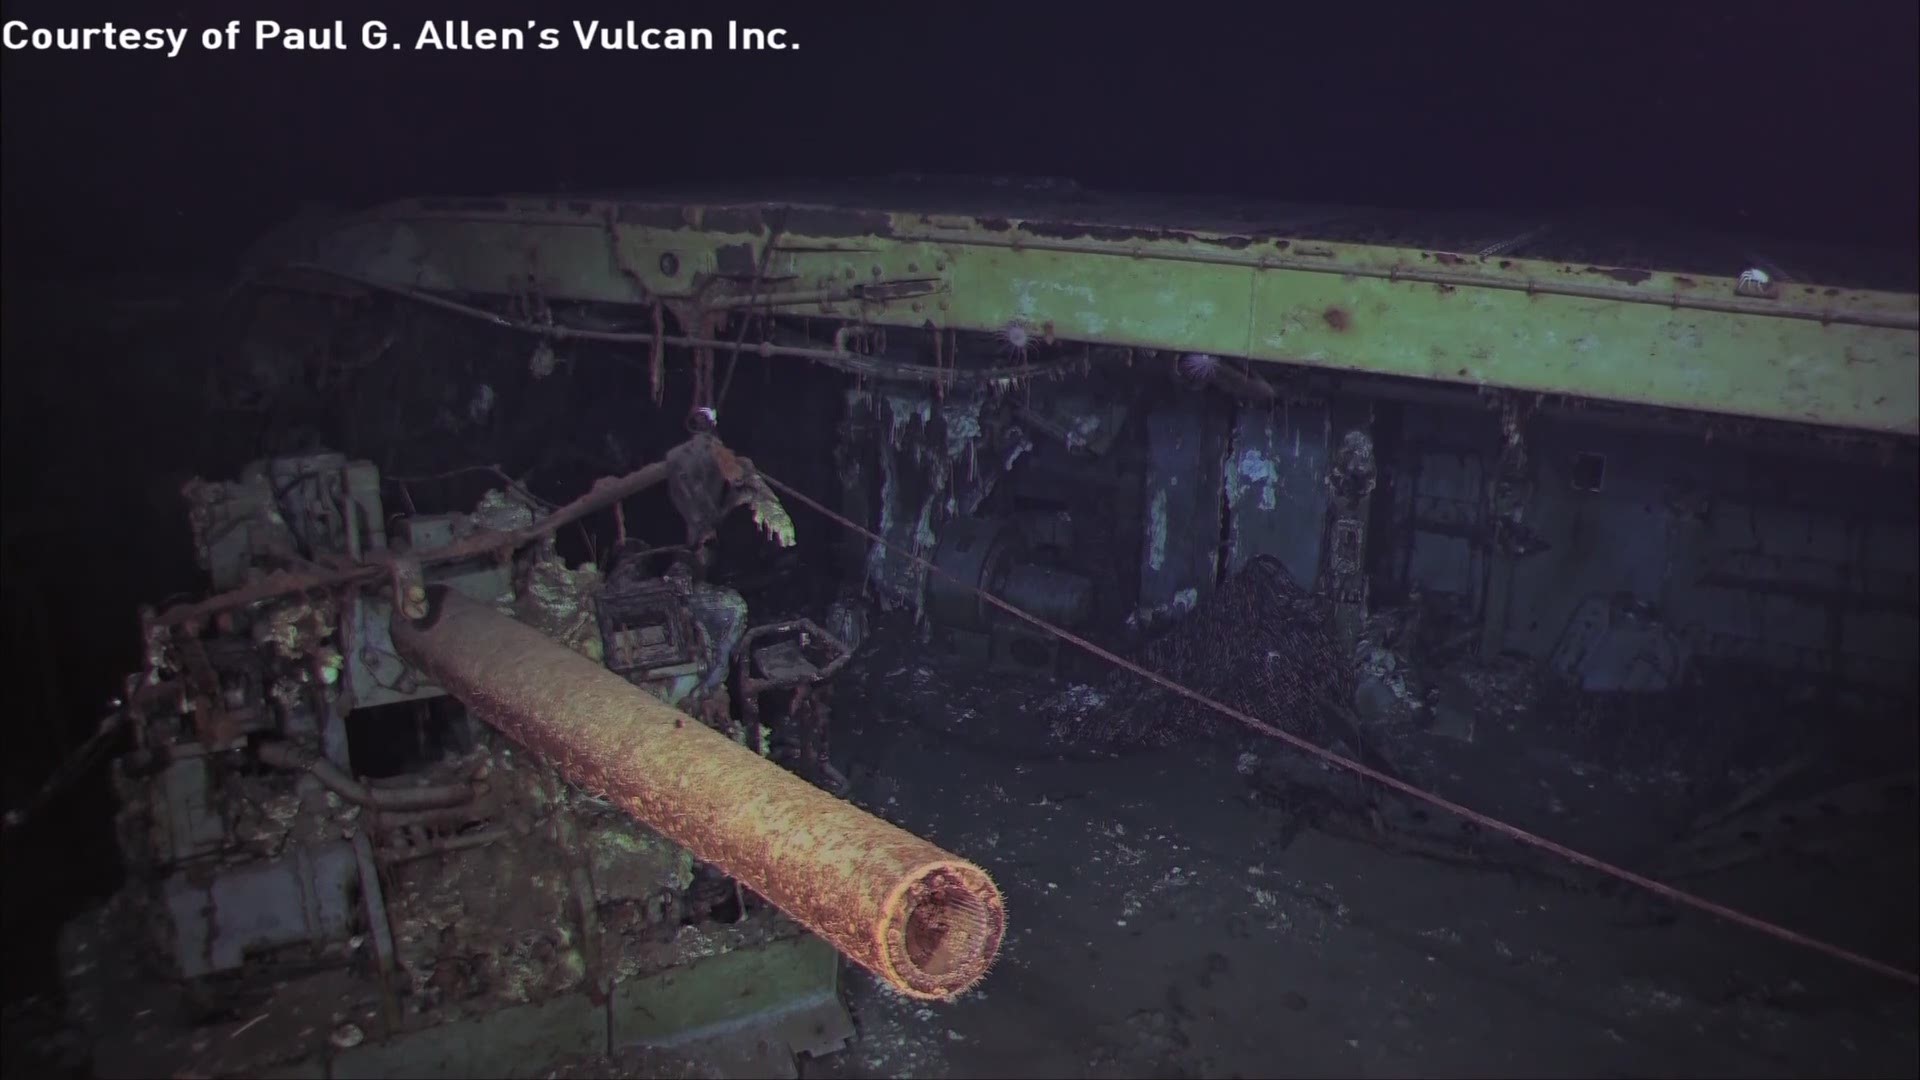 Crews captured footage of the USS Wasp nearly 14,000 feet below the surface of the Coral Sea.